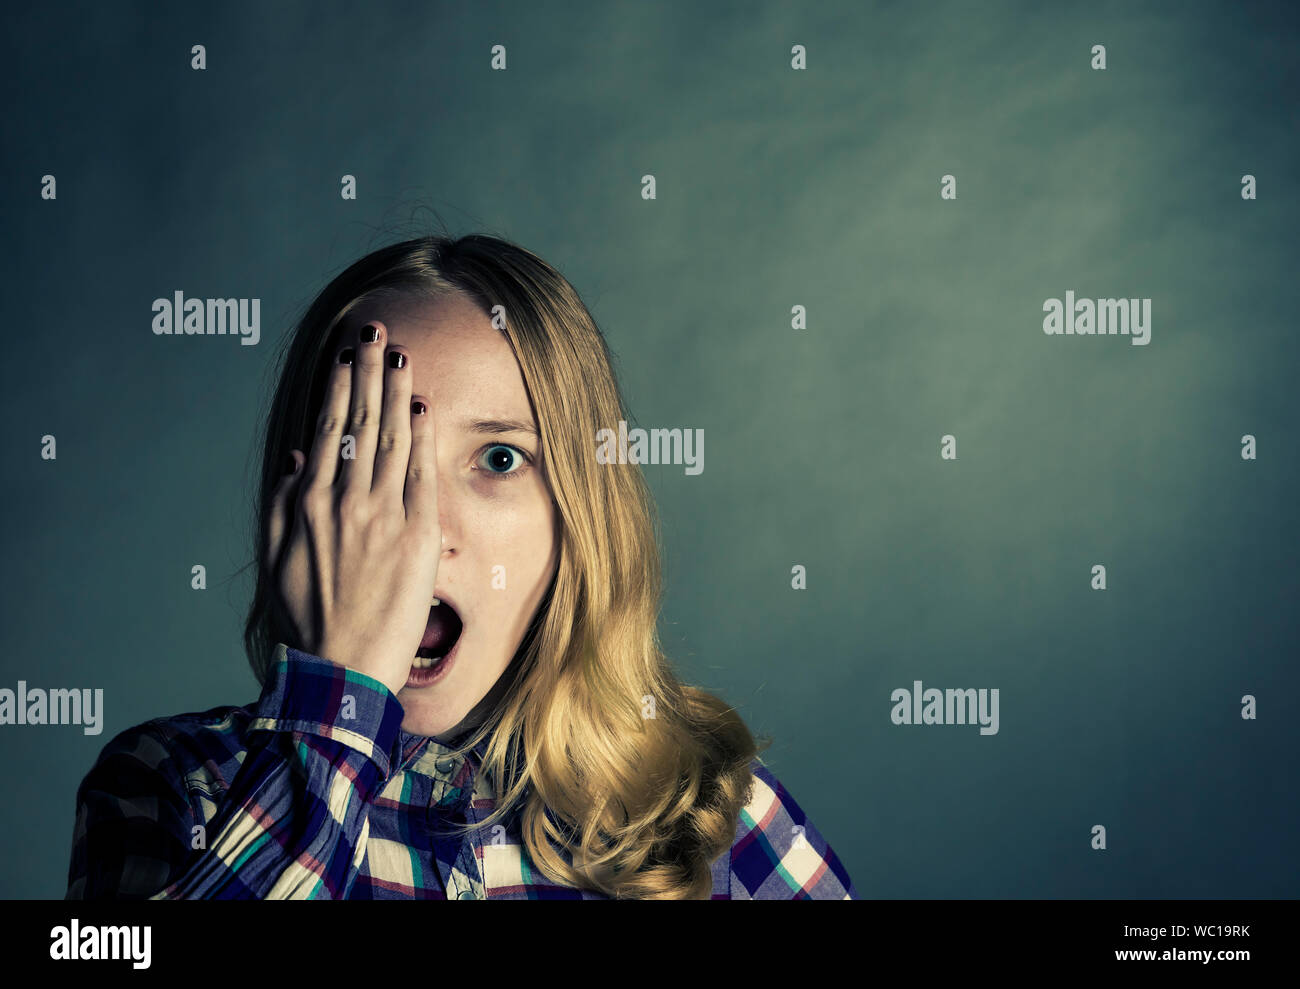 Portrait Of Surprised Young Woman With Hand On Face Against Wall Stock Photo